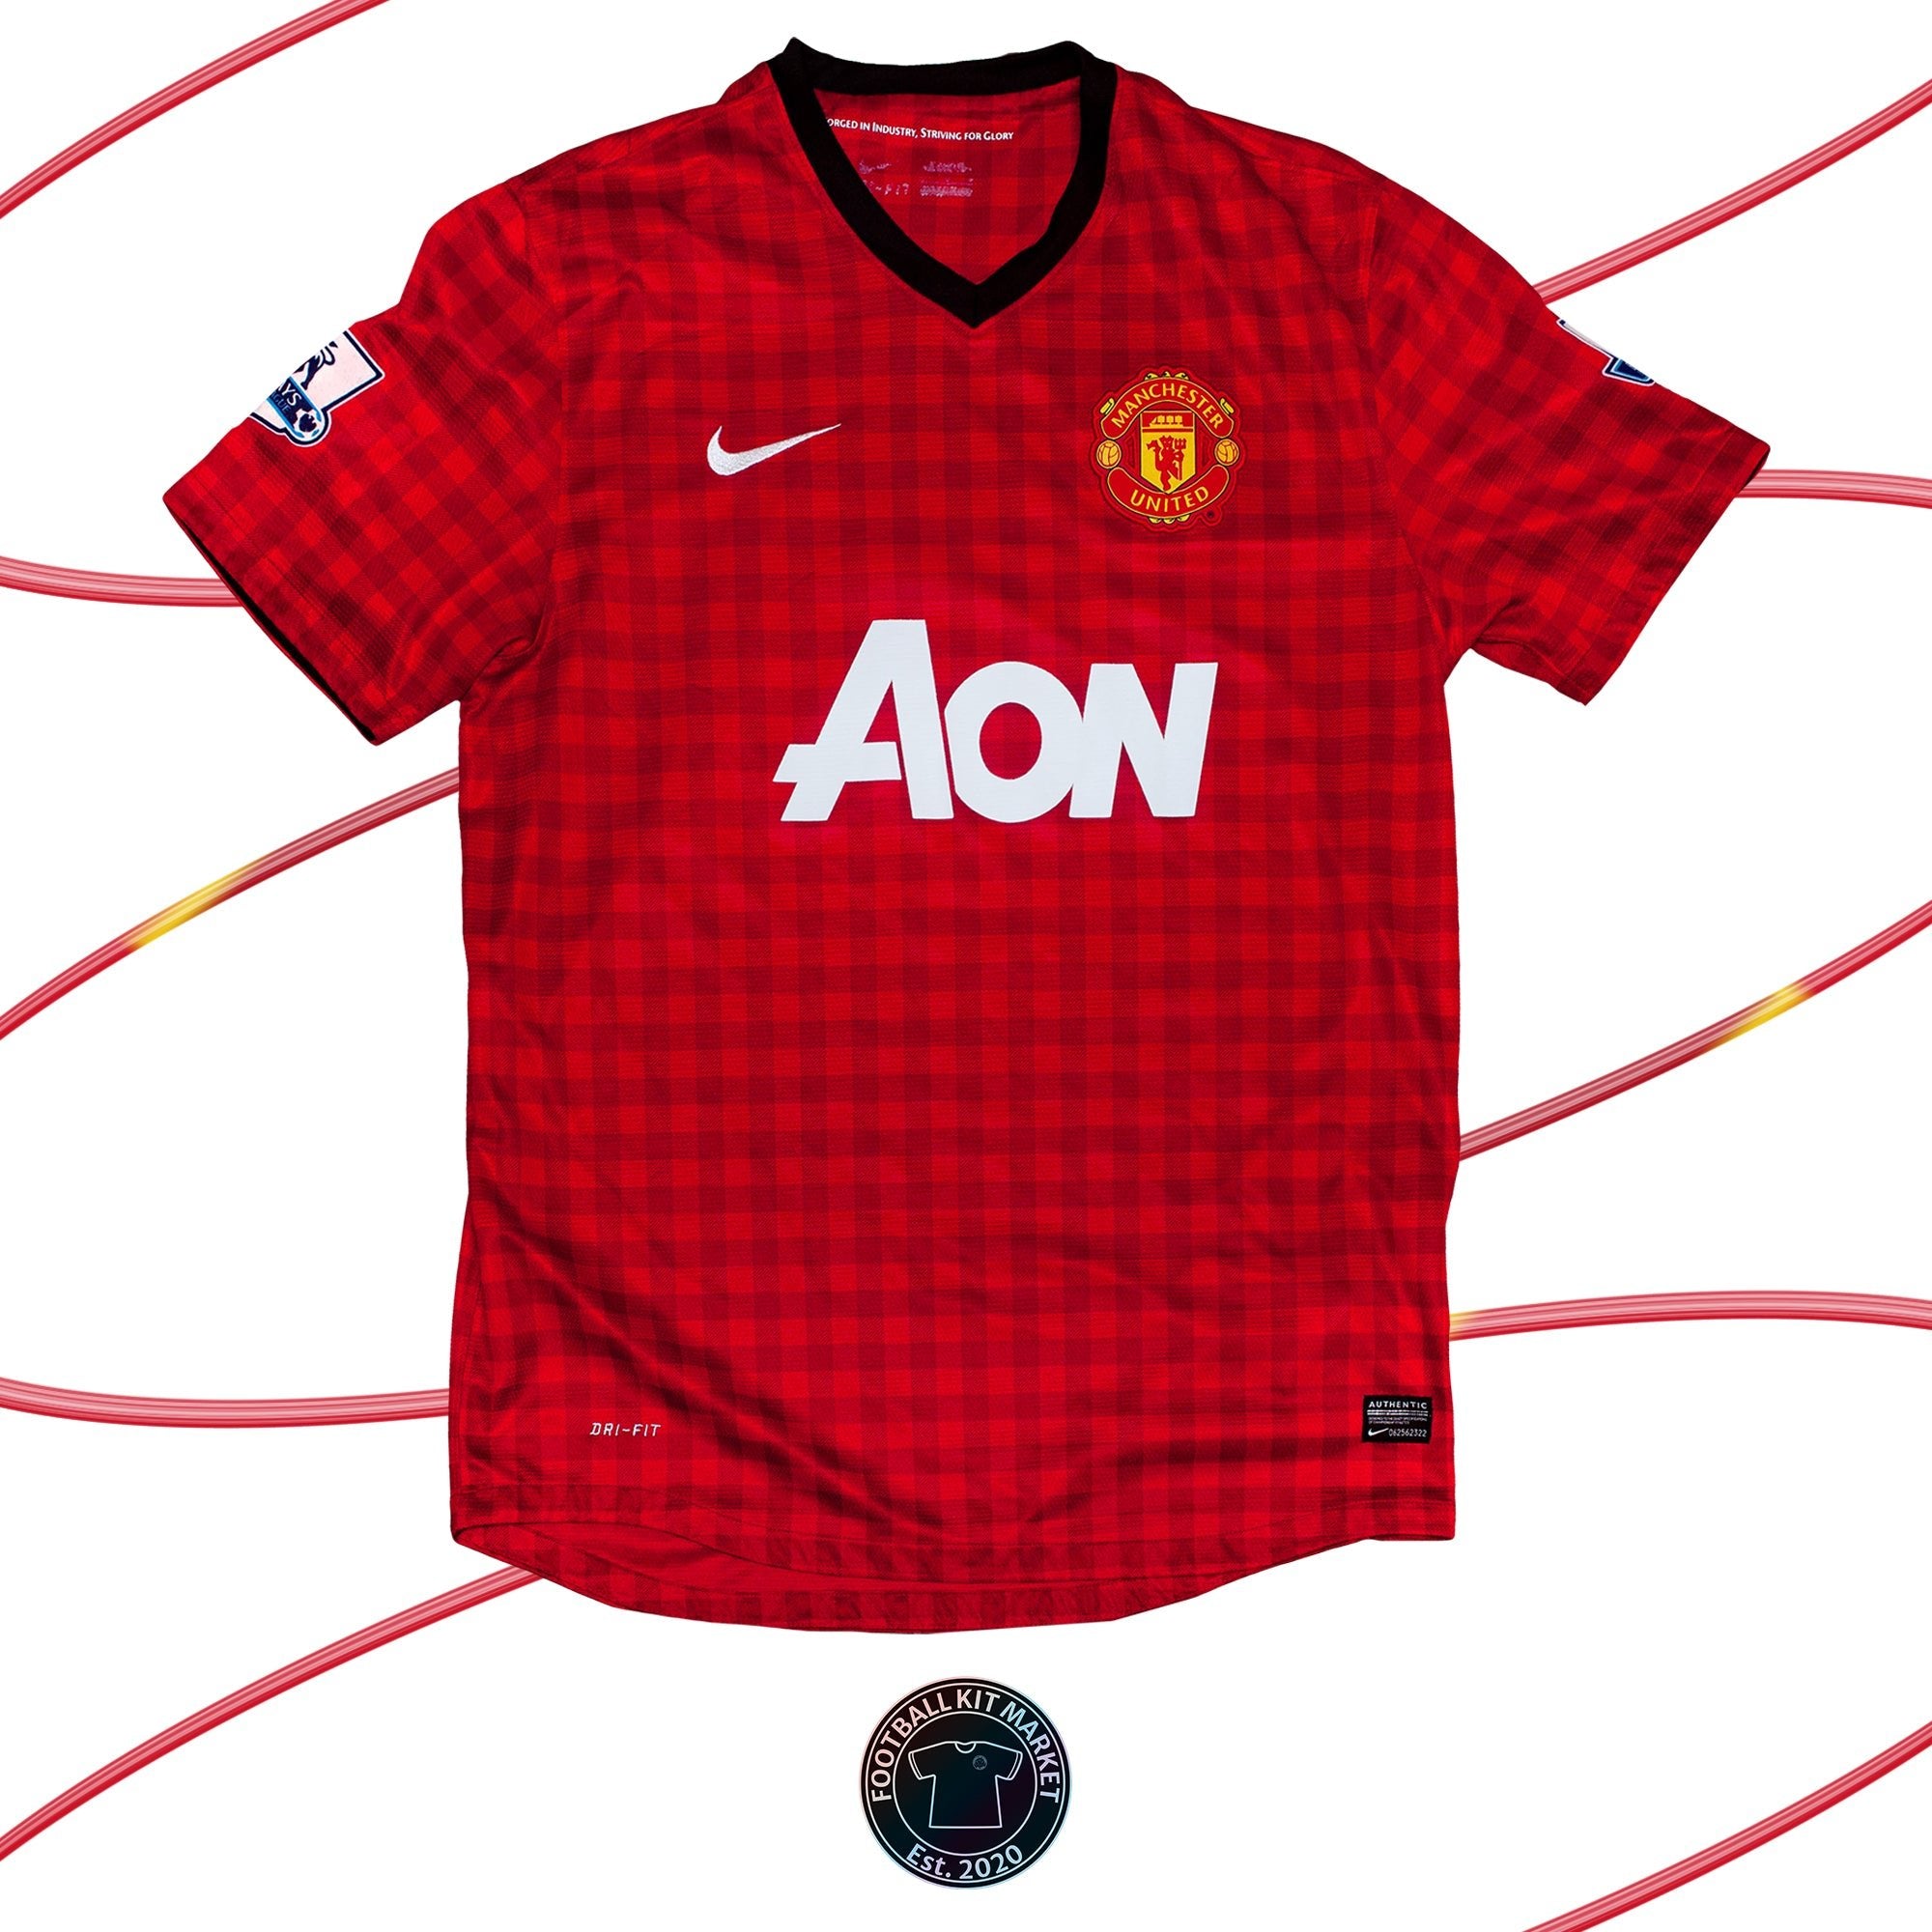 Genuine MANCHESTER UNITED Home Shirt VALENCIA (2012-2013) - NIKE (L) - Product Image from Football Kit Market